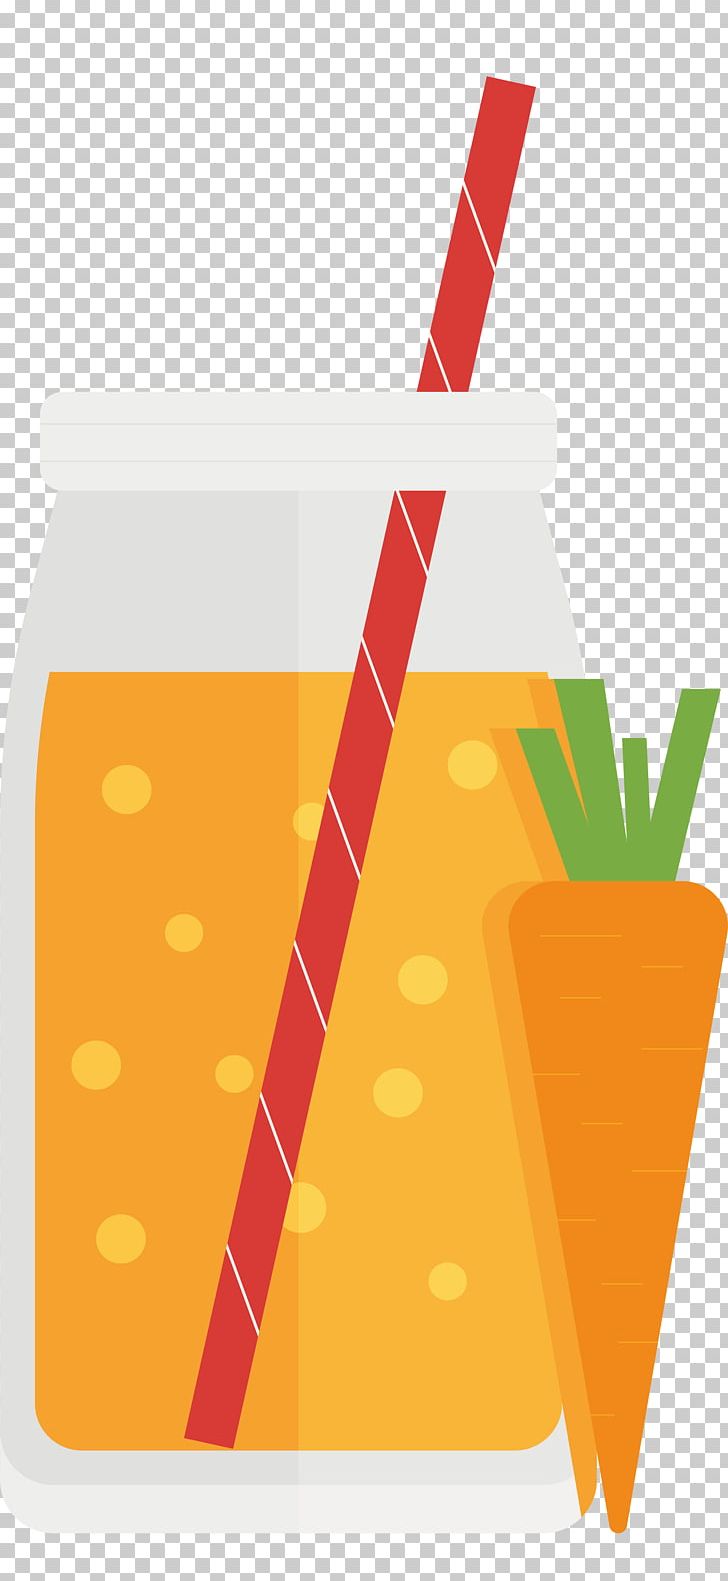 Carrot Juice Carrot Juice Drink PNG, Clipart, Angle, Carrot, Carrot Juice, Carrot Vector, Daucus Carota Free PNG Download